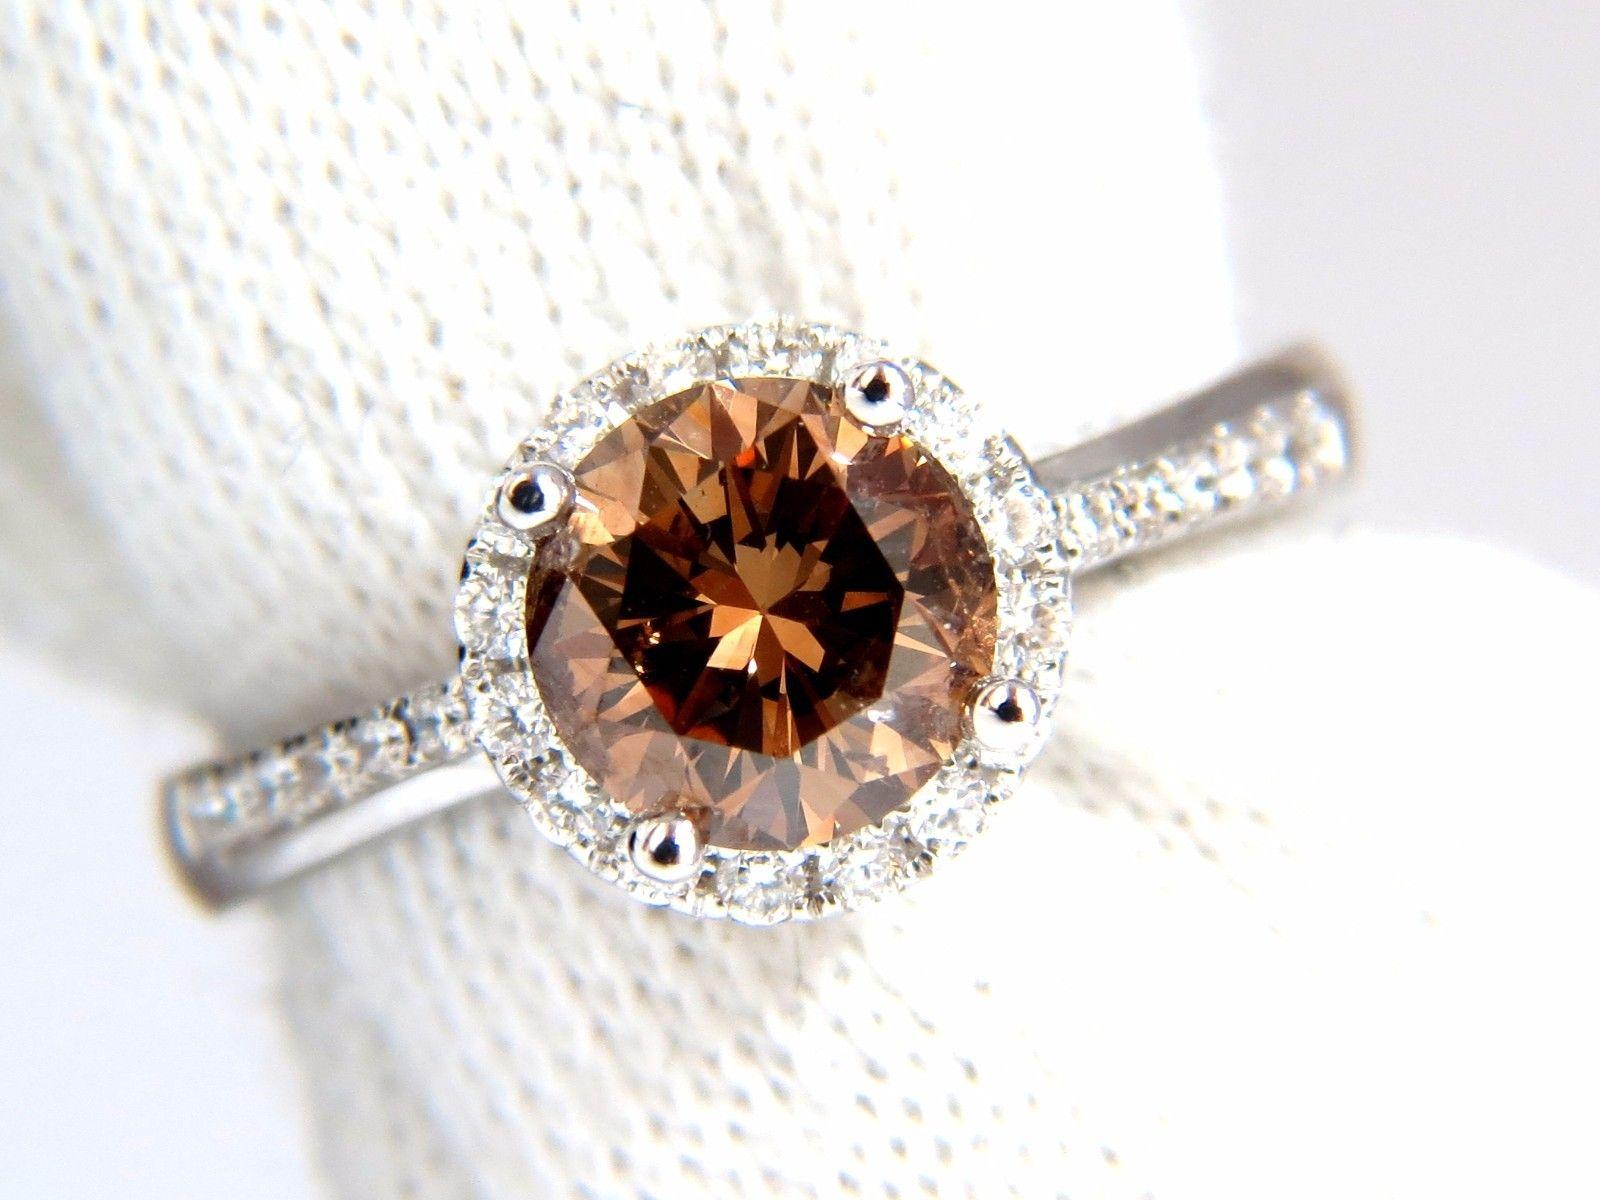 Raised Solitaire Round.

1.28ct. Natural round diamond ring

Fancy vivid orange brown color

 Si-1 clarity 

Very good Cut / Full cut Brilliant

Side round white diamonds:

.50ct G-color & Vs-2 clarity.

18kt white  gold

Ring size: